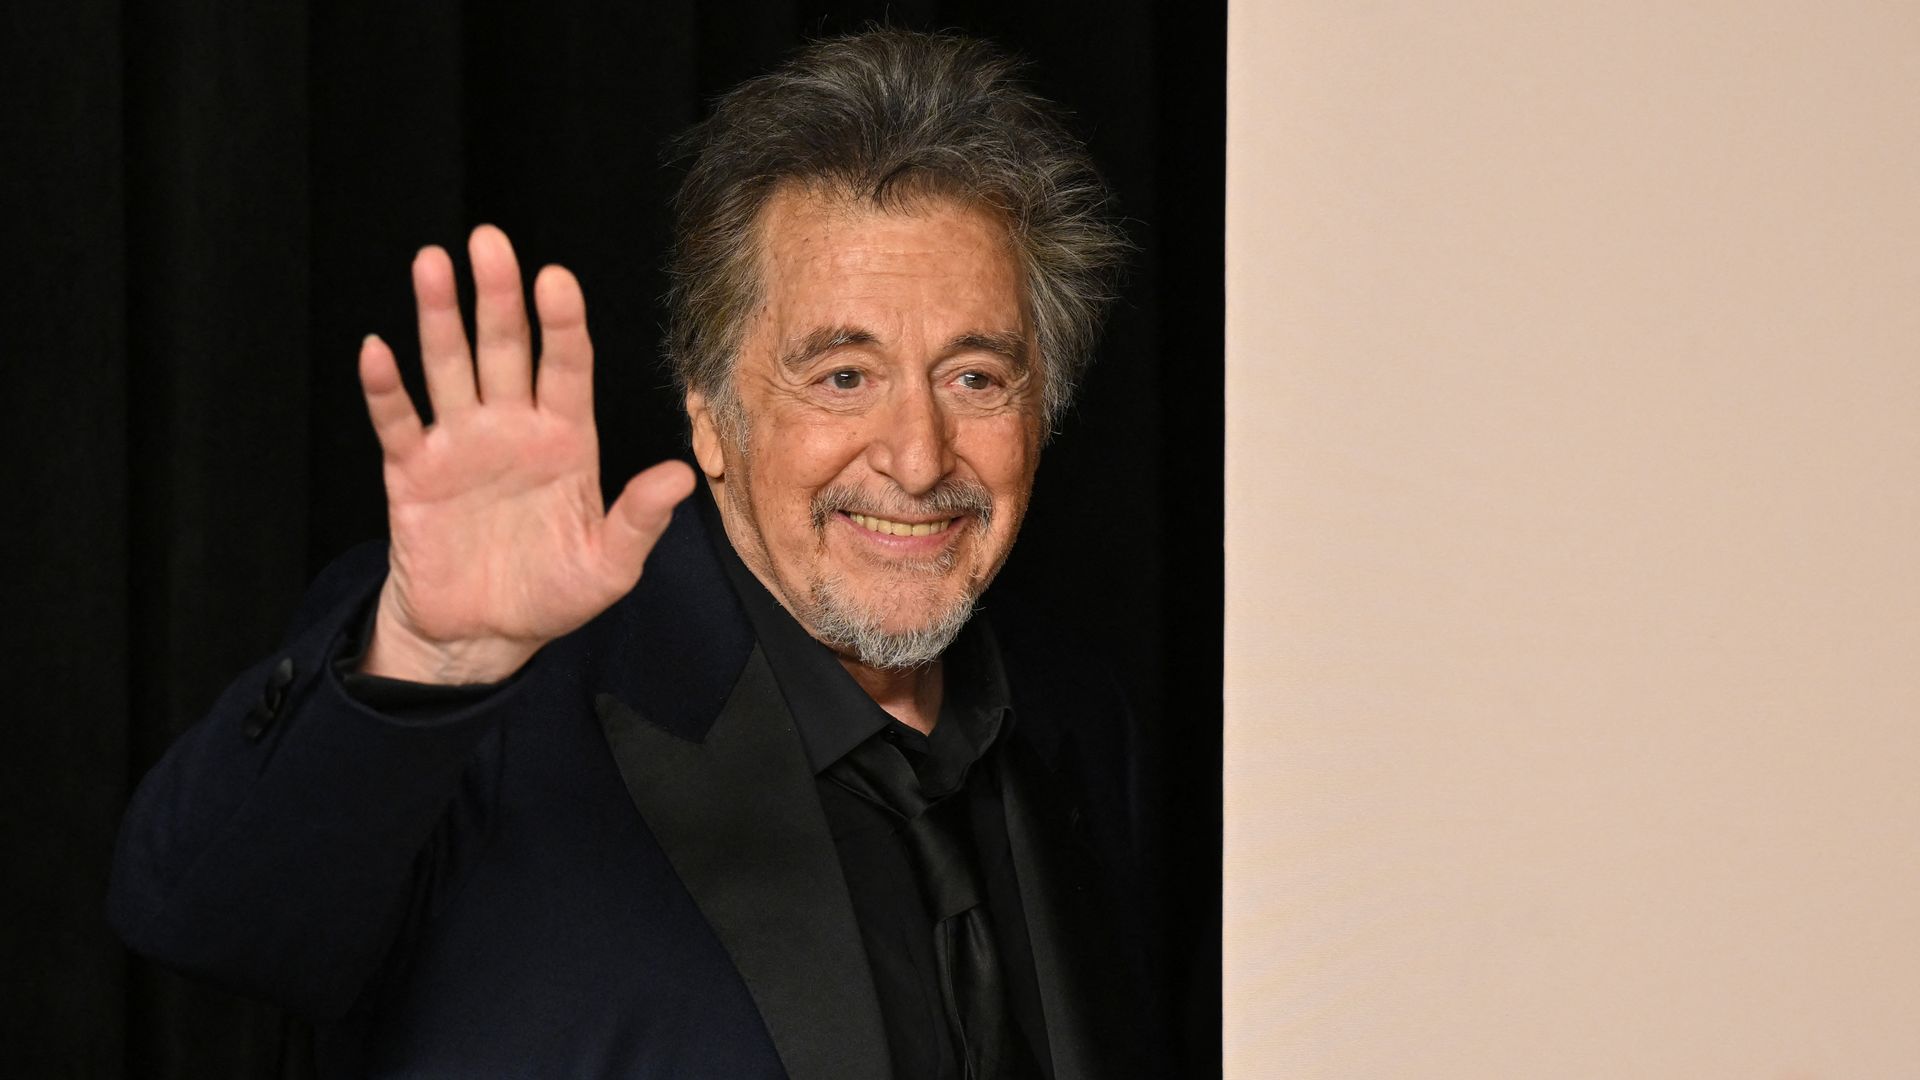 US actor Al Pacino waves as he leaves the press room during the 96th Annual Academy Awards at the Dolby Theatre in Hollywood, California on March 10, 2024. (Photo by Robyn BECK / AFP) (Photo by ROBYN BECK/AFP via Getty Images)